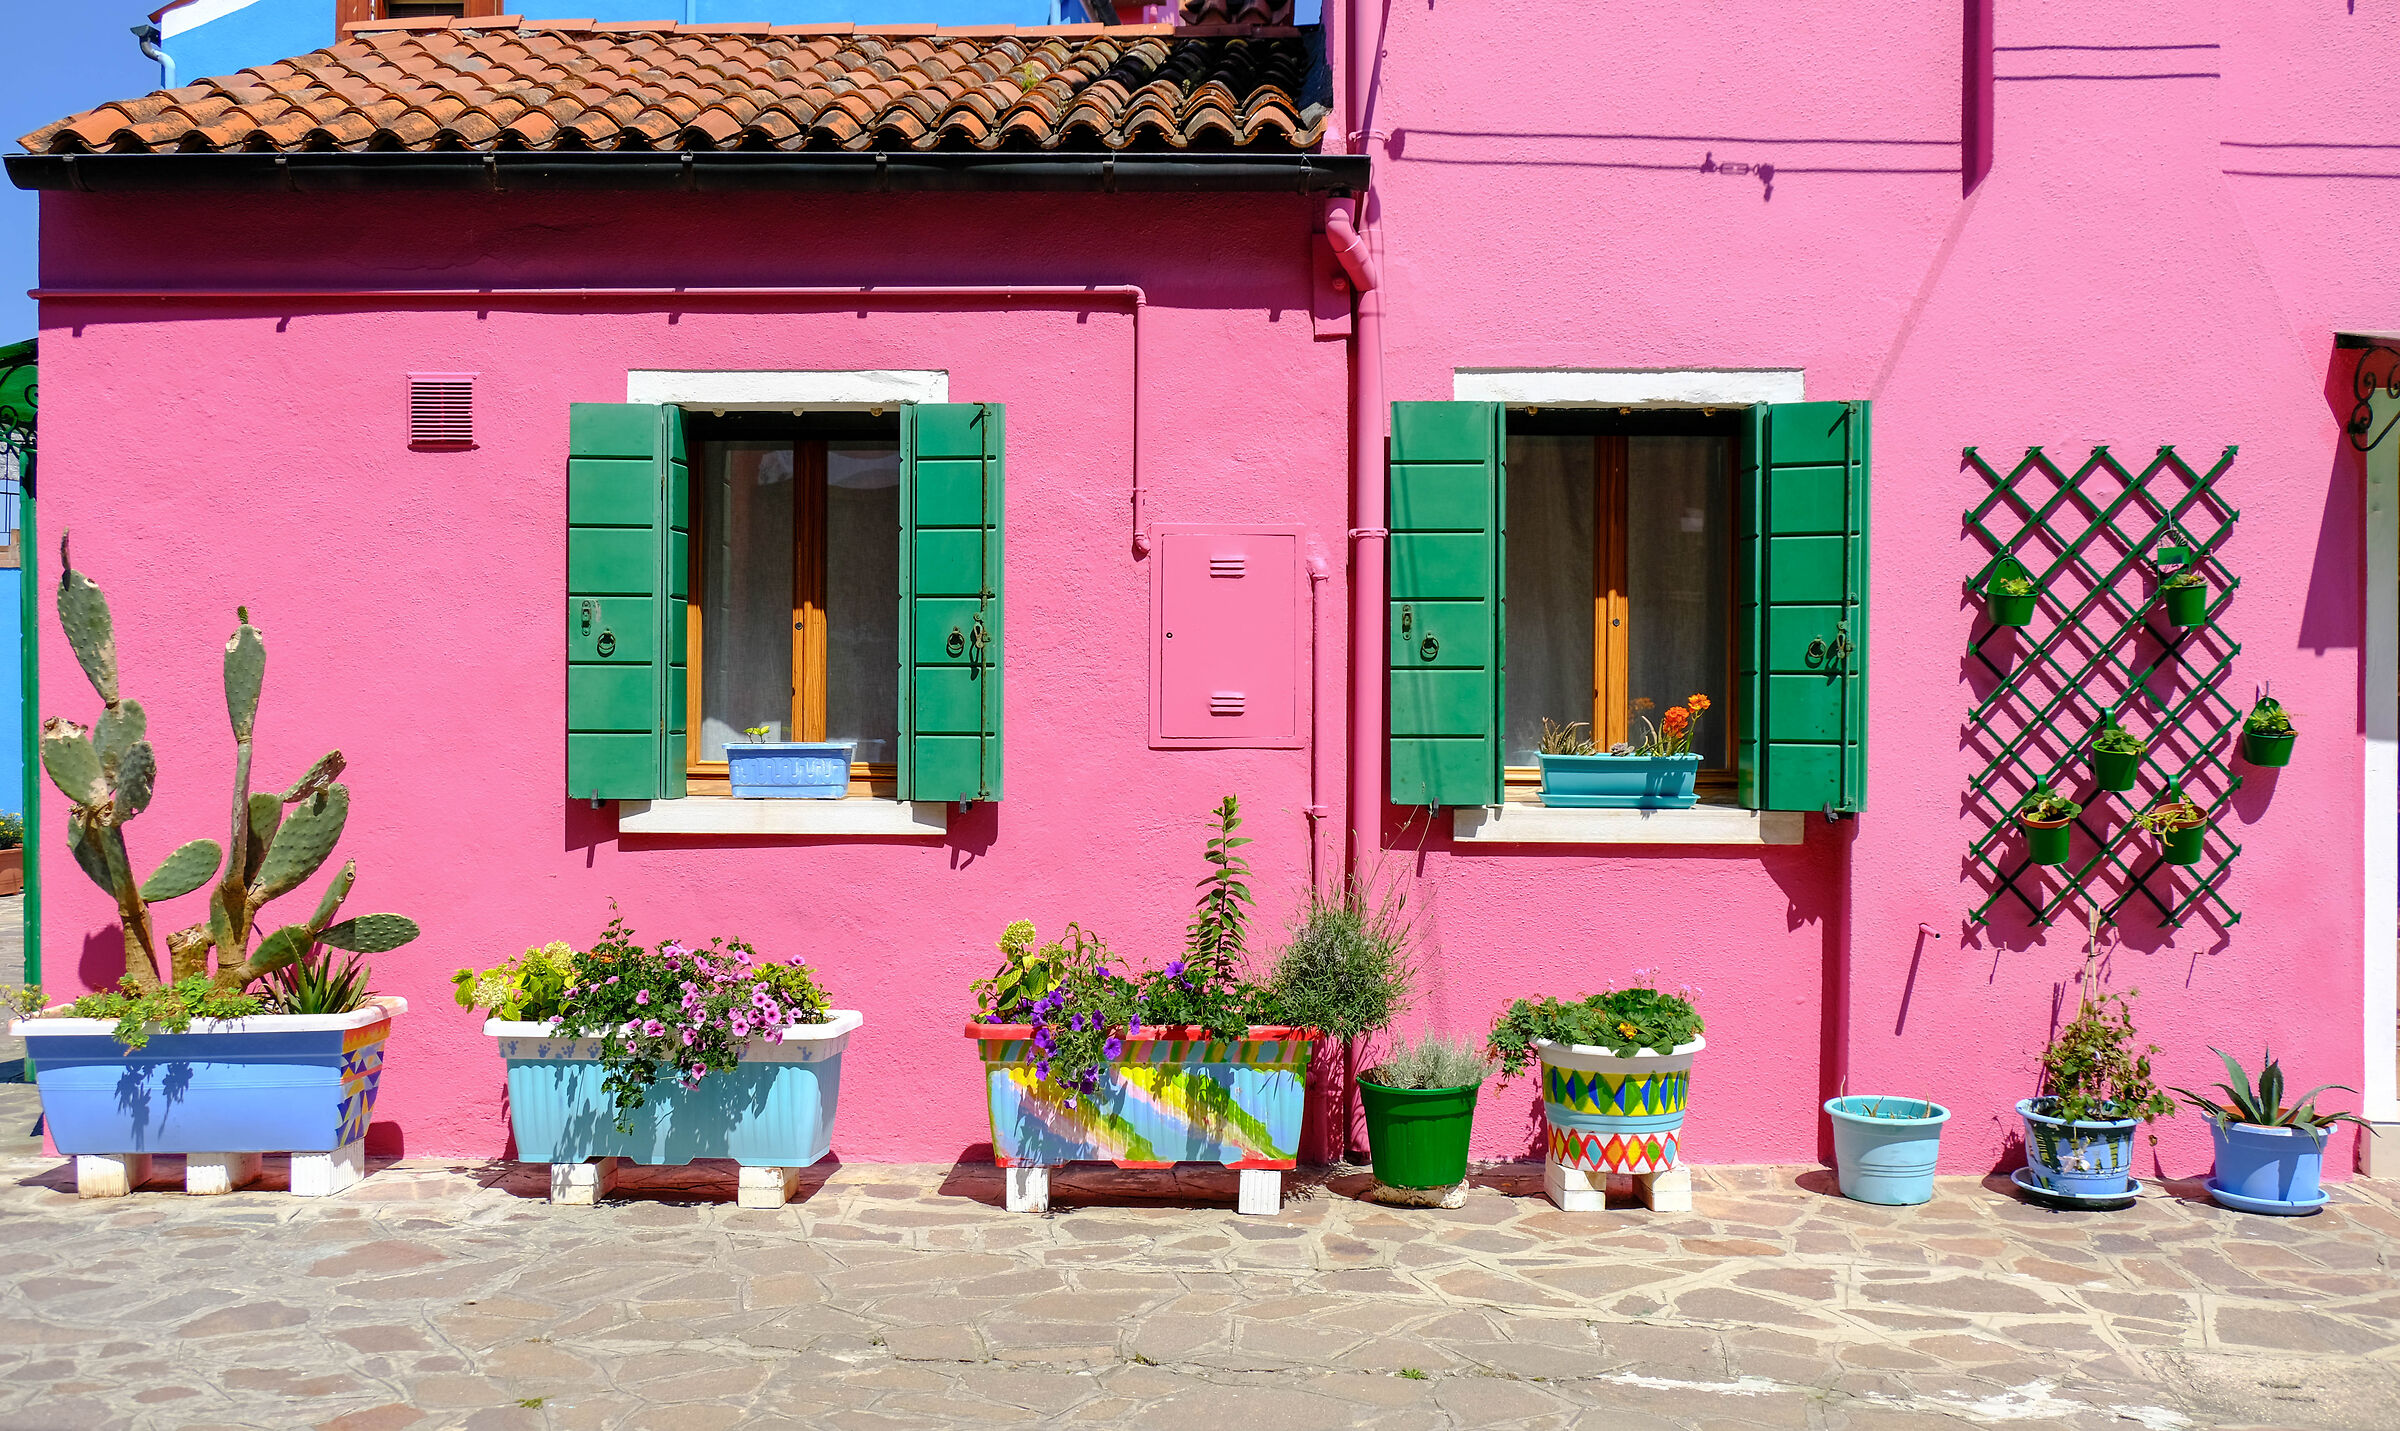 Burano and colors...